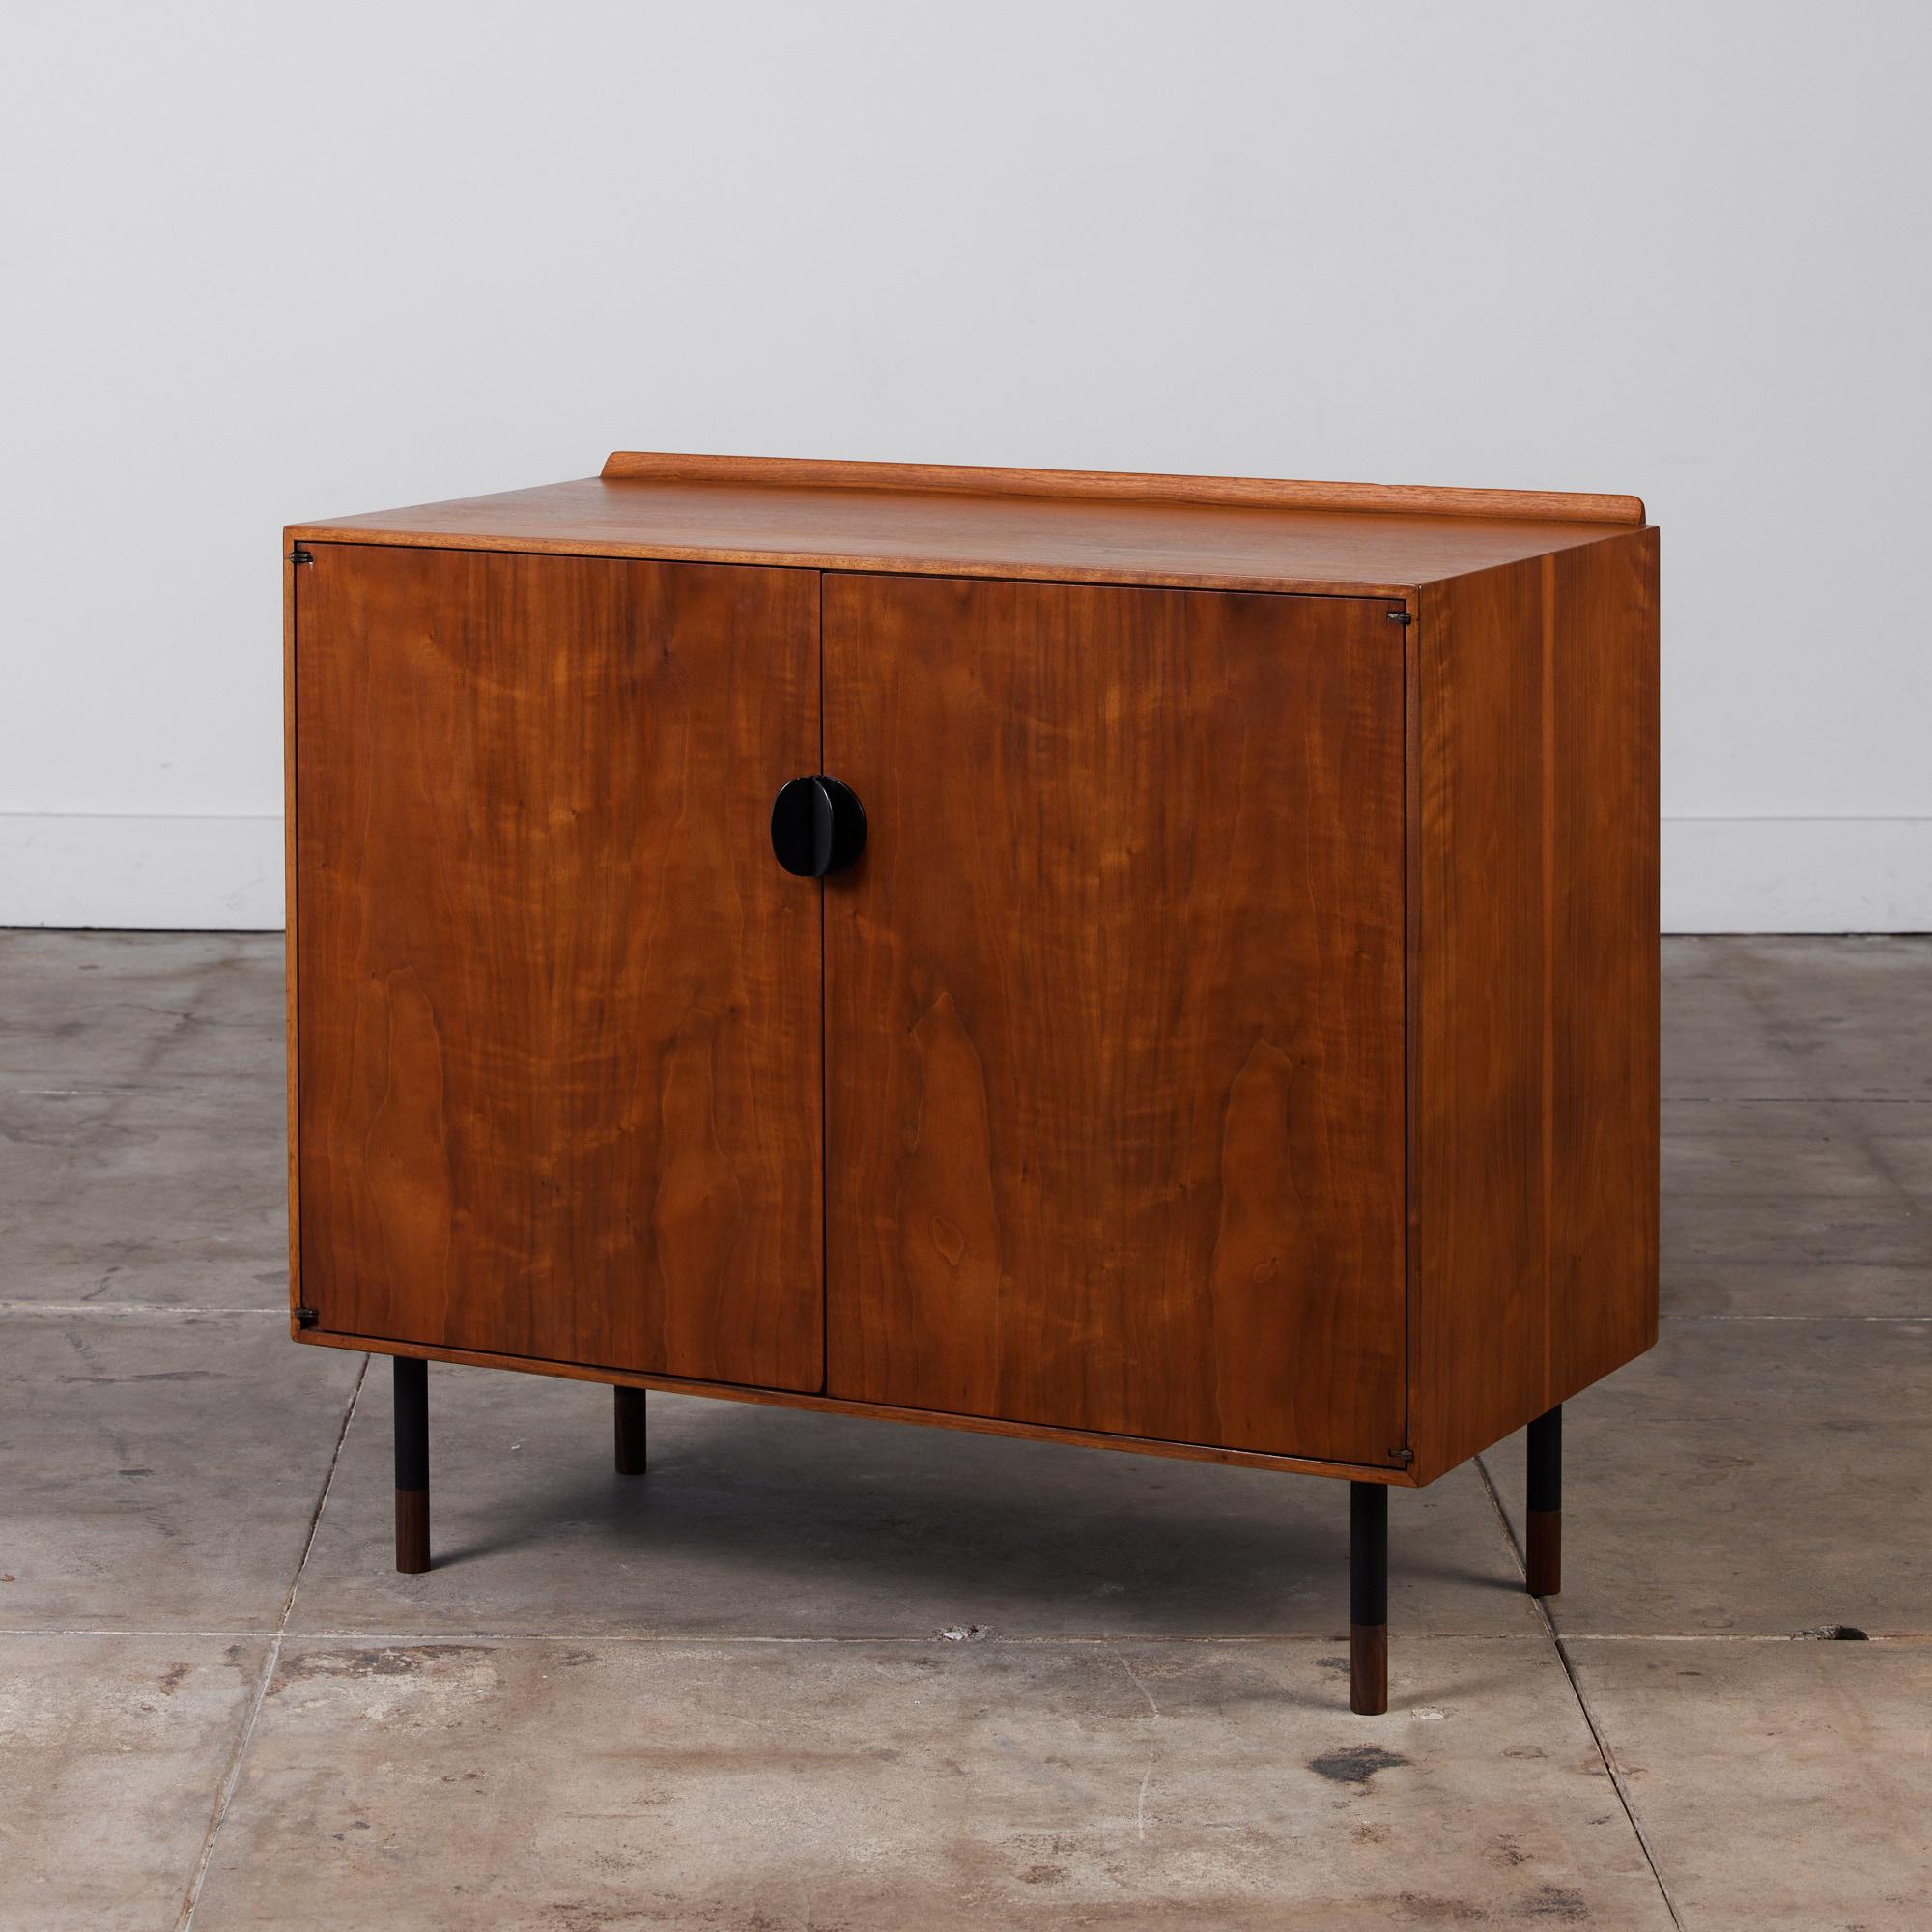 Finn Juhl designed this walnut cabinet for American manufacturer Baker furniture in the 1950s for their 